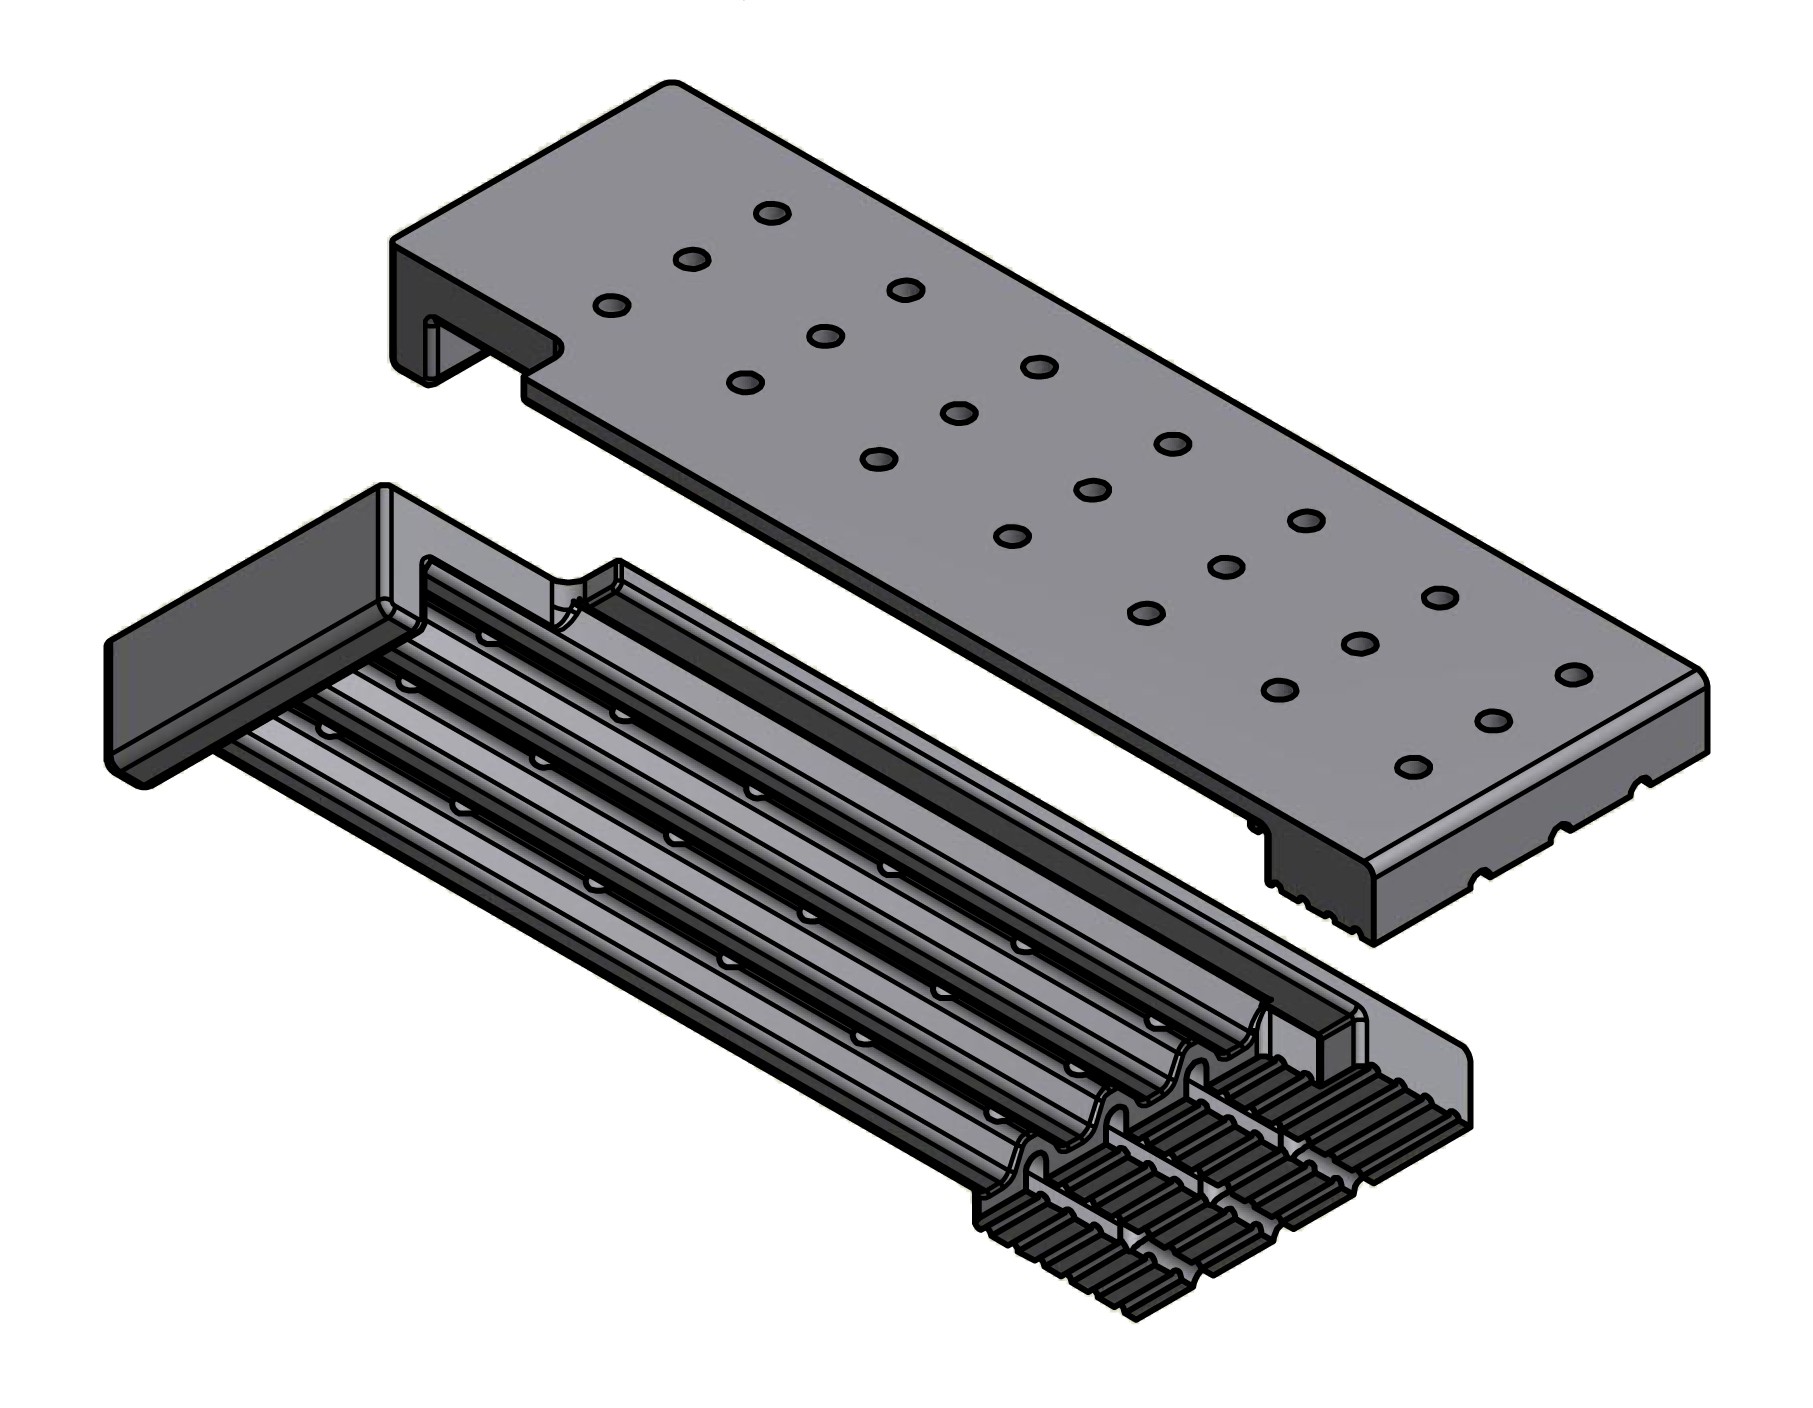 Movable grate element without the tongue 100mm wide, Biojet Multi 200-2000 BJM500-156D